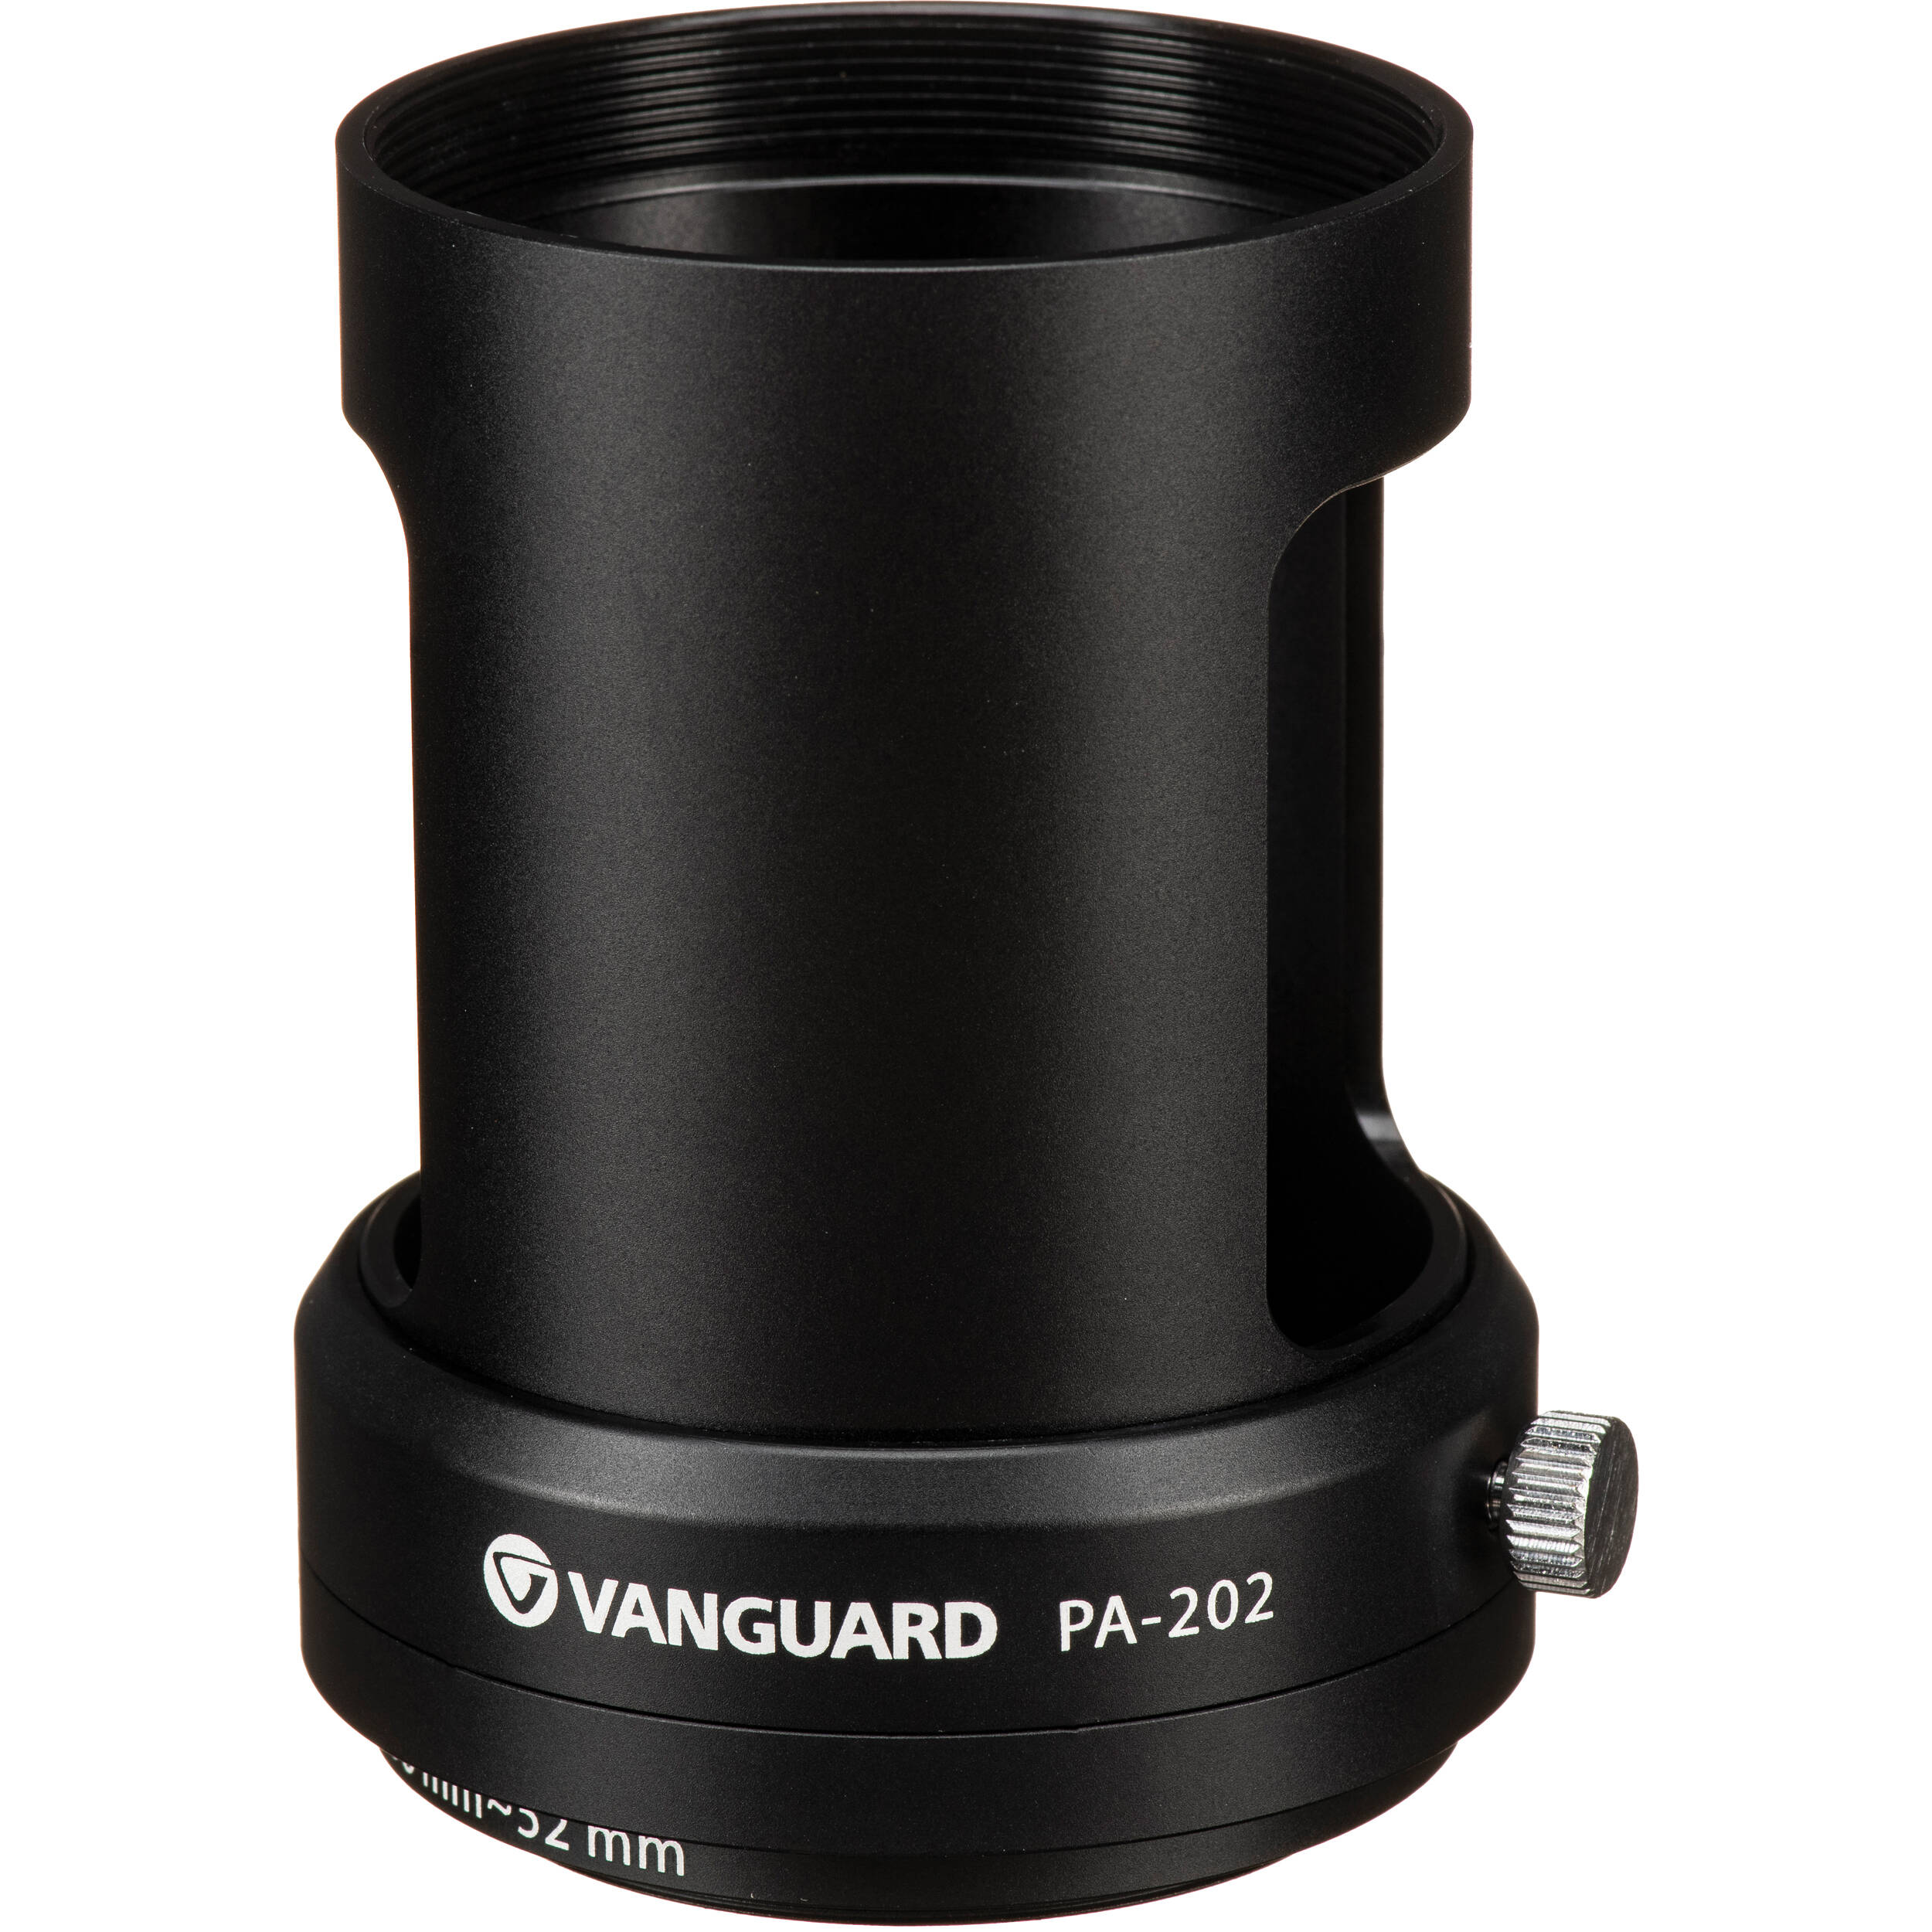 Vanguard PA-202 Spotting Scope Camera Adaptor for Endeavor HD and Endeavor XF